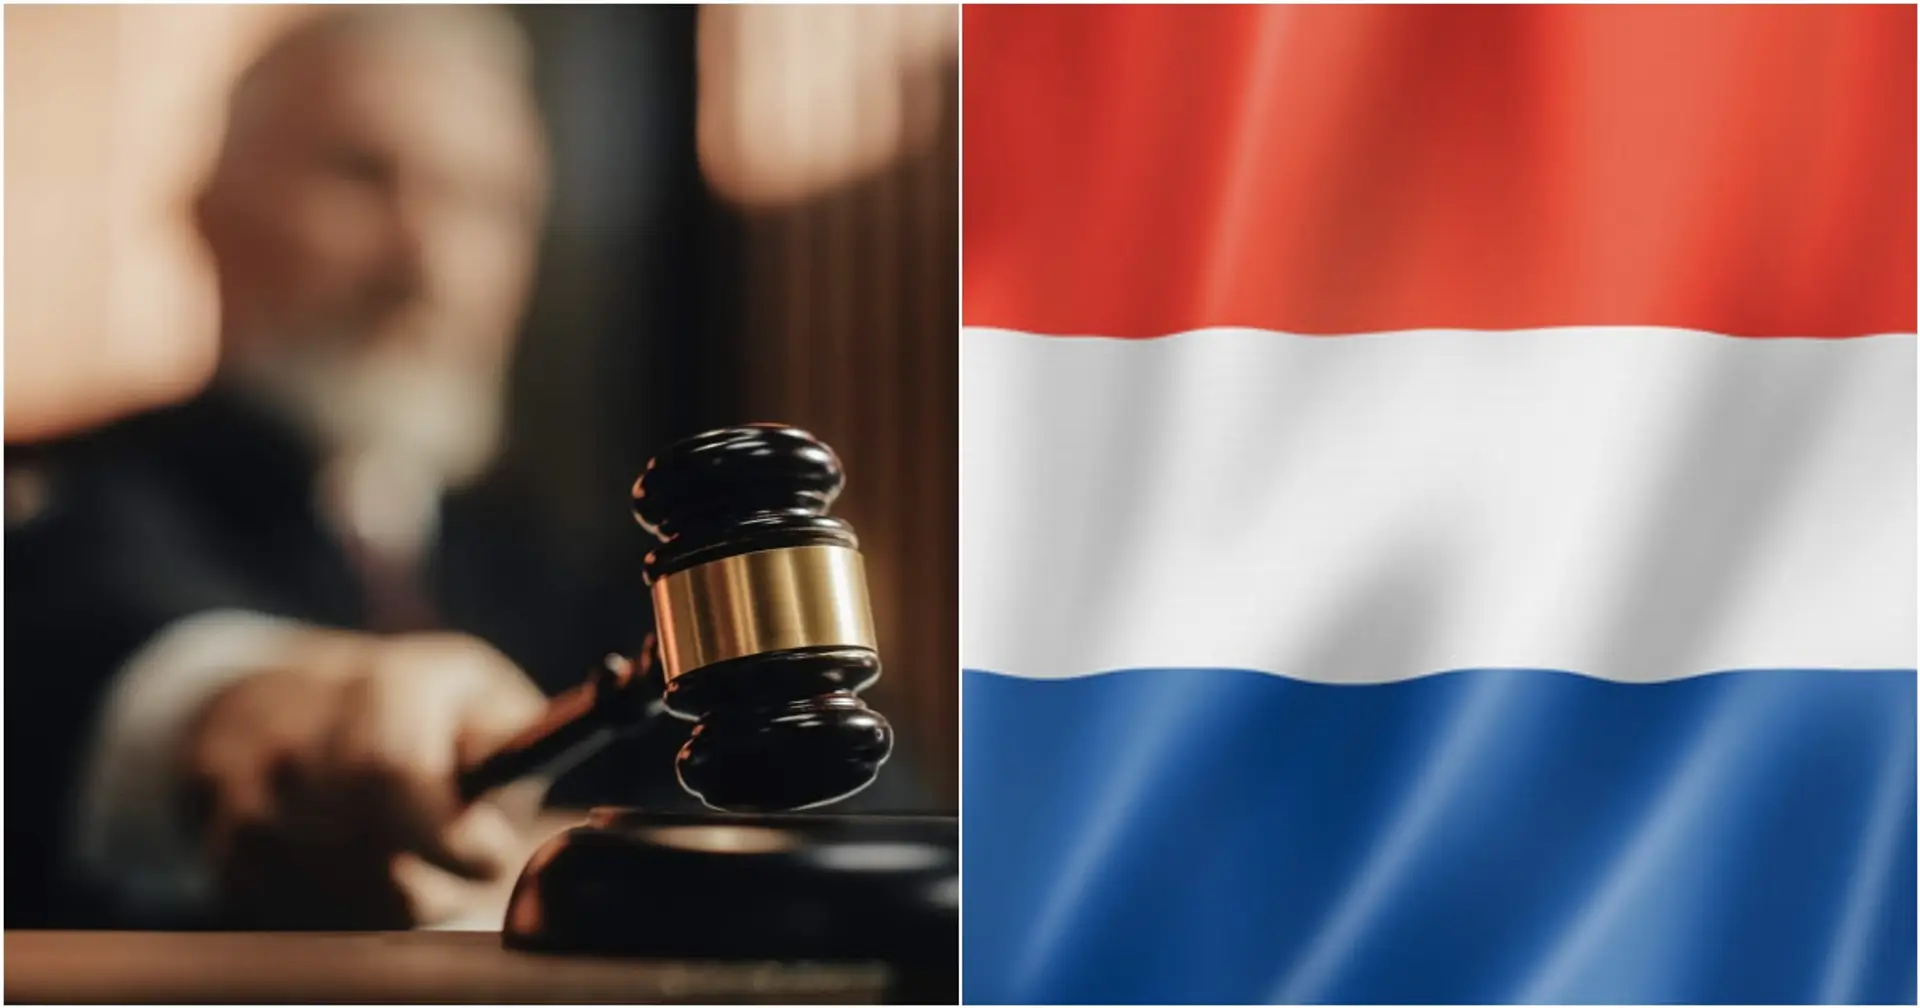 Going Dutch: Netherlands set worrying trend in iGaming that can make entire industry collapse